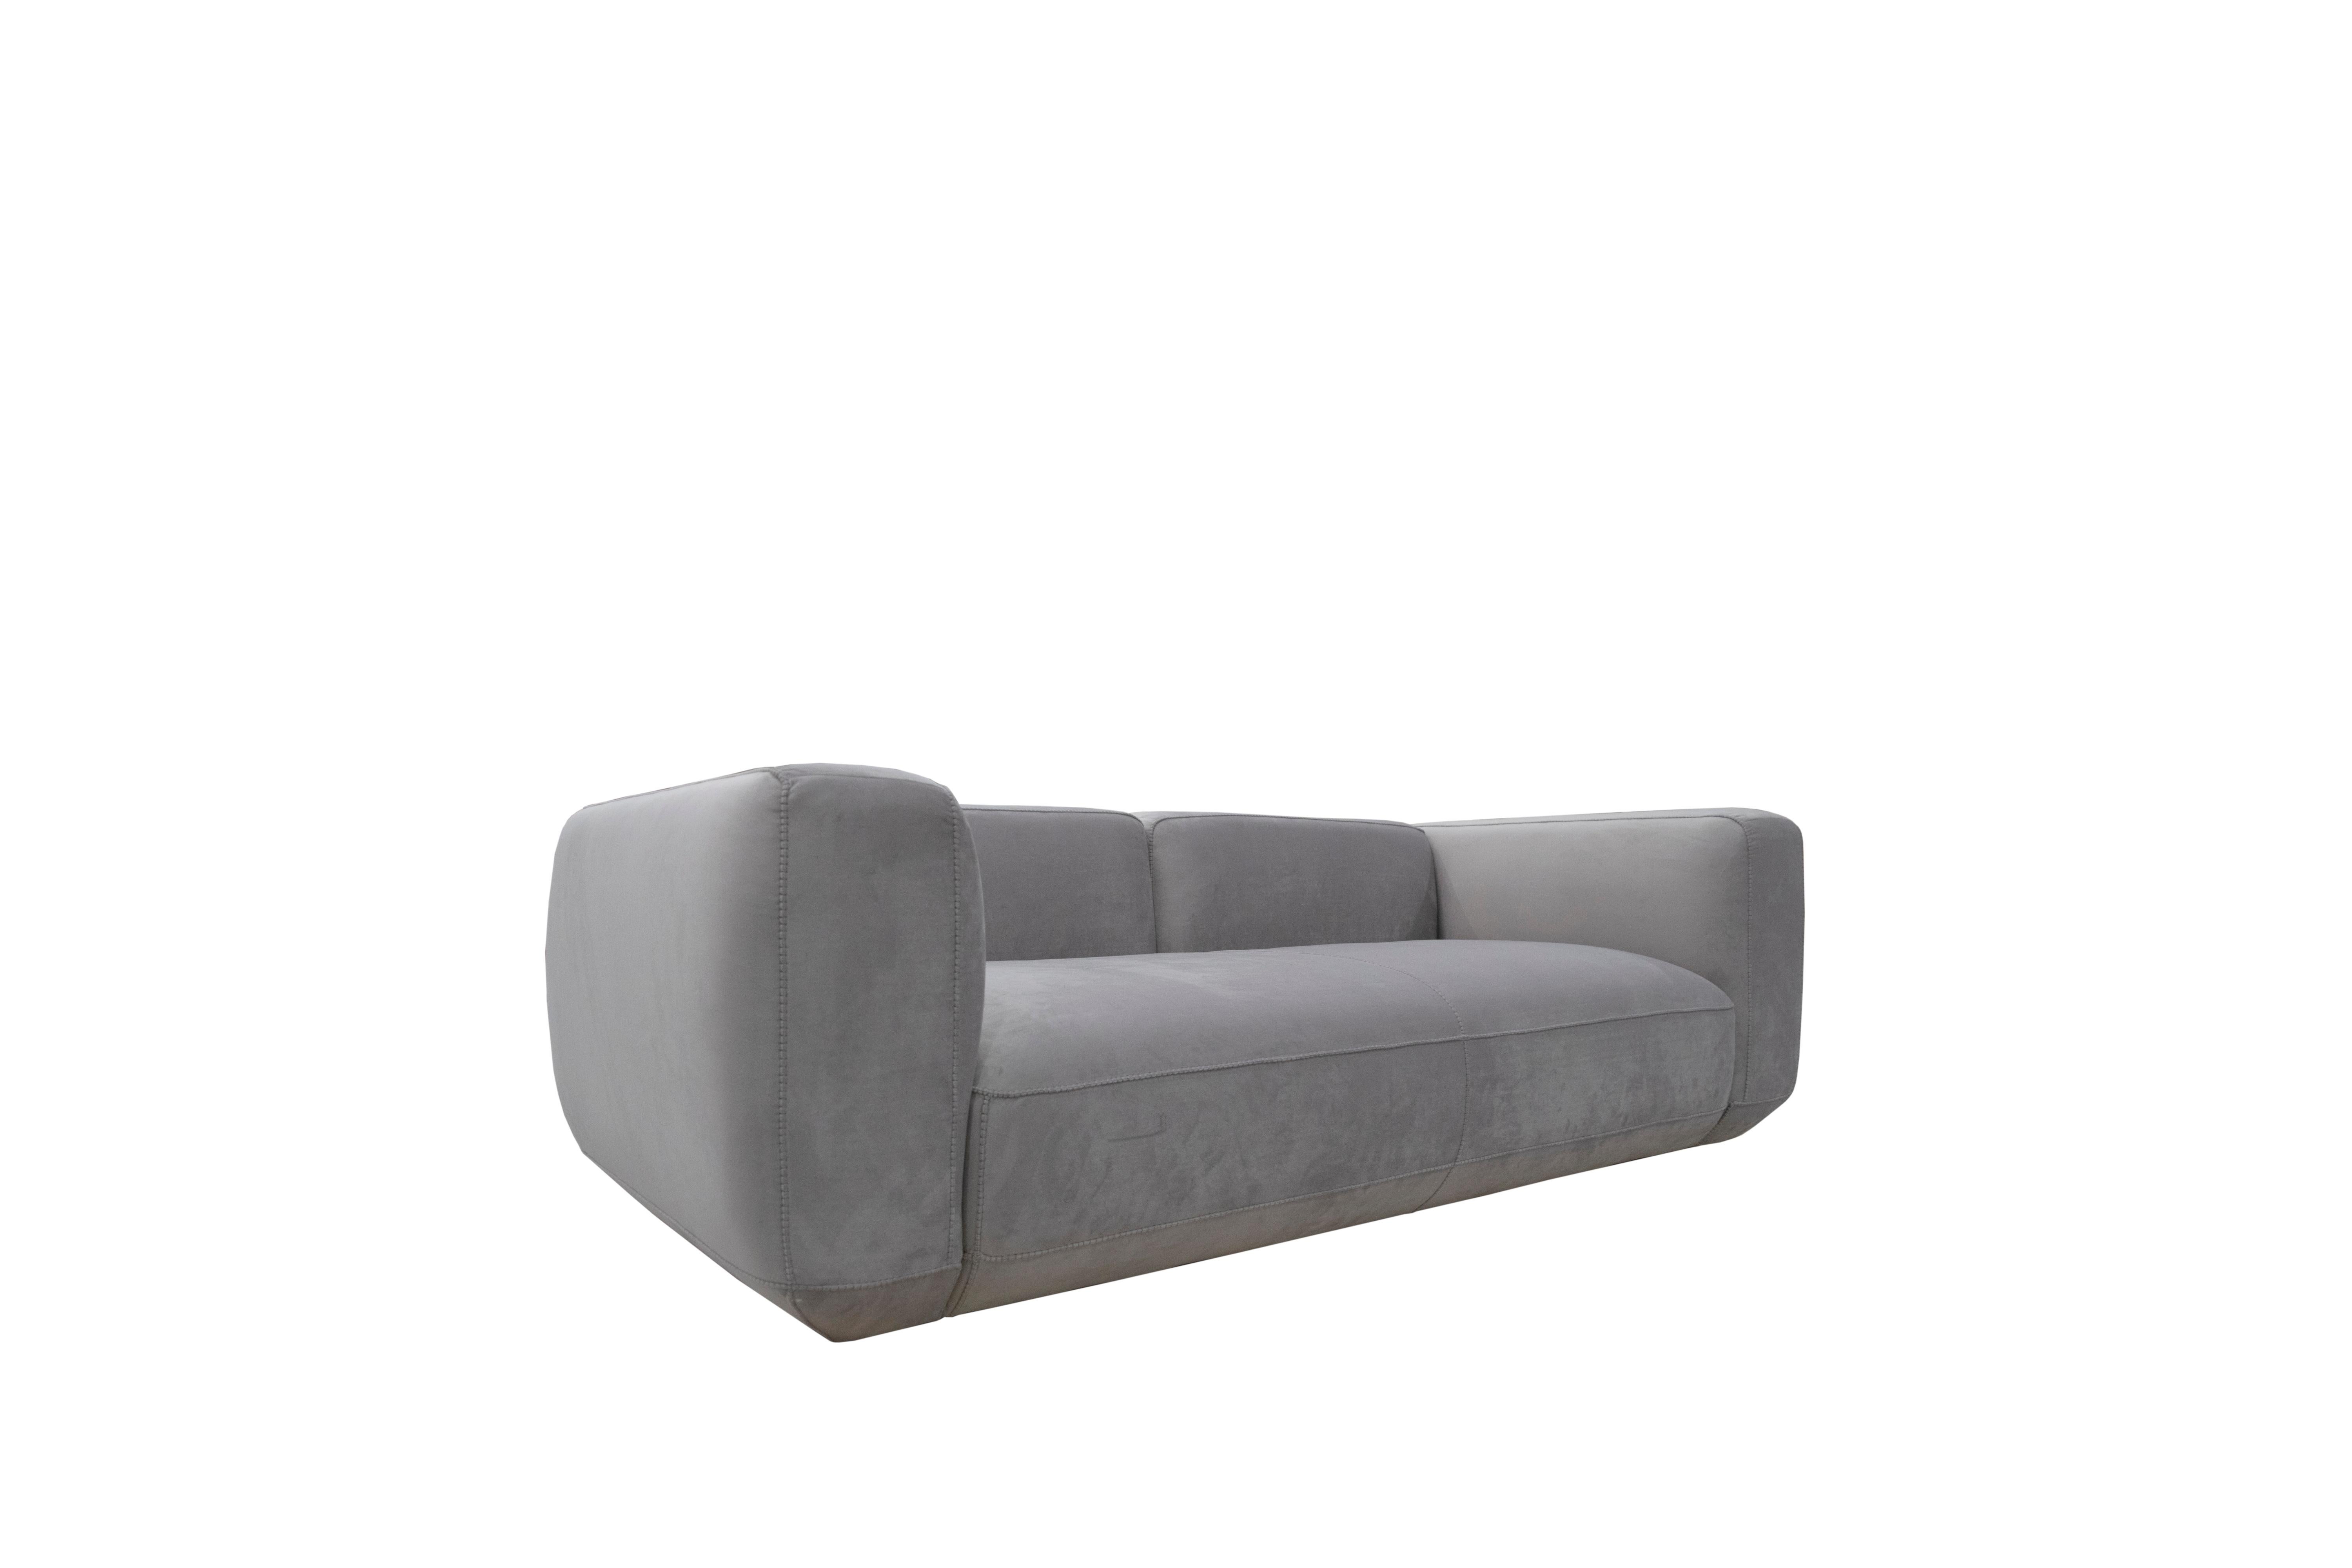 Natura Sofa '2-Seater' in Light Grey Fabric Upholstery For Sale at 1stDibs